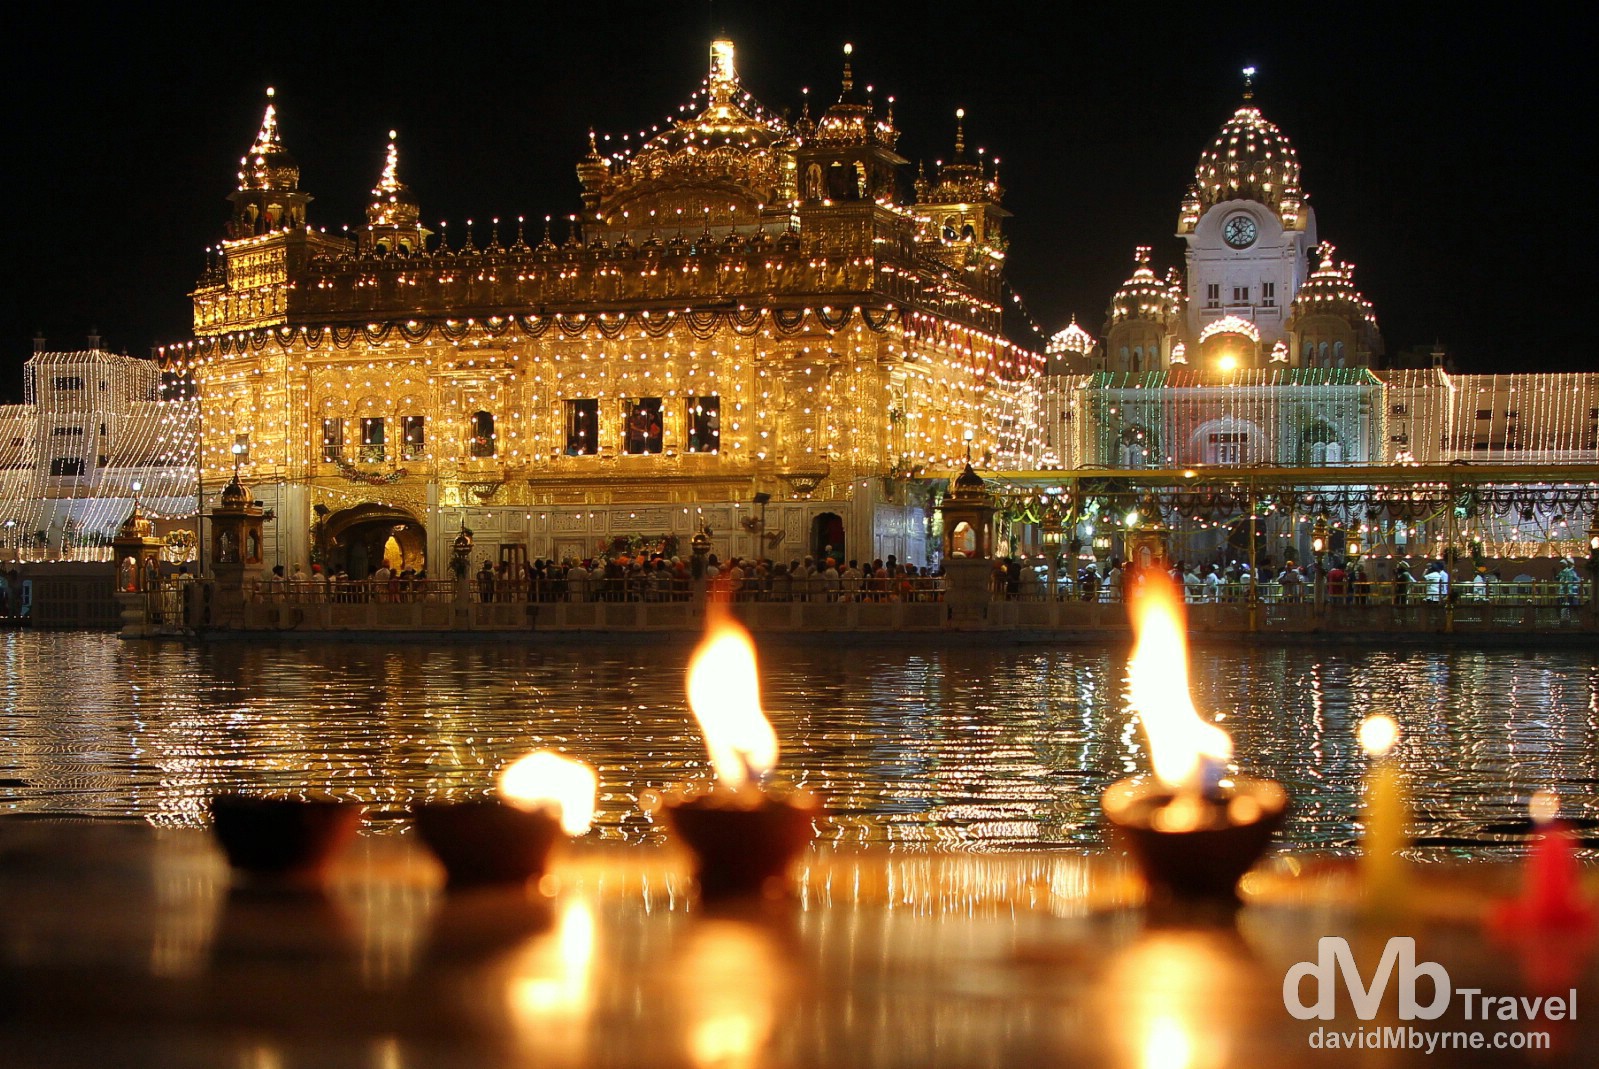 The Golden Temple, Amritsar, Punjab, India, on the night of the 4th Guru's birthday celebrations. October 9th 2012.